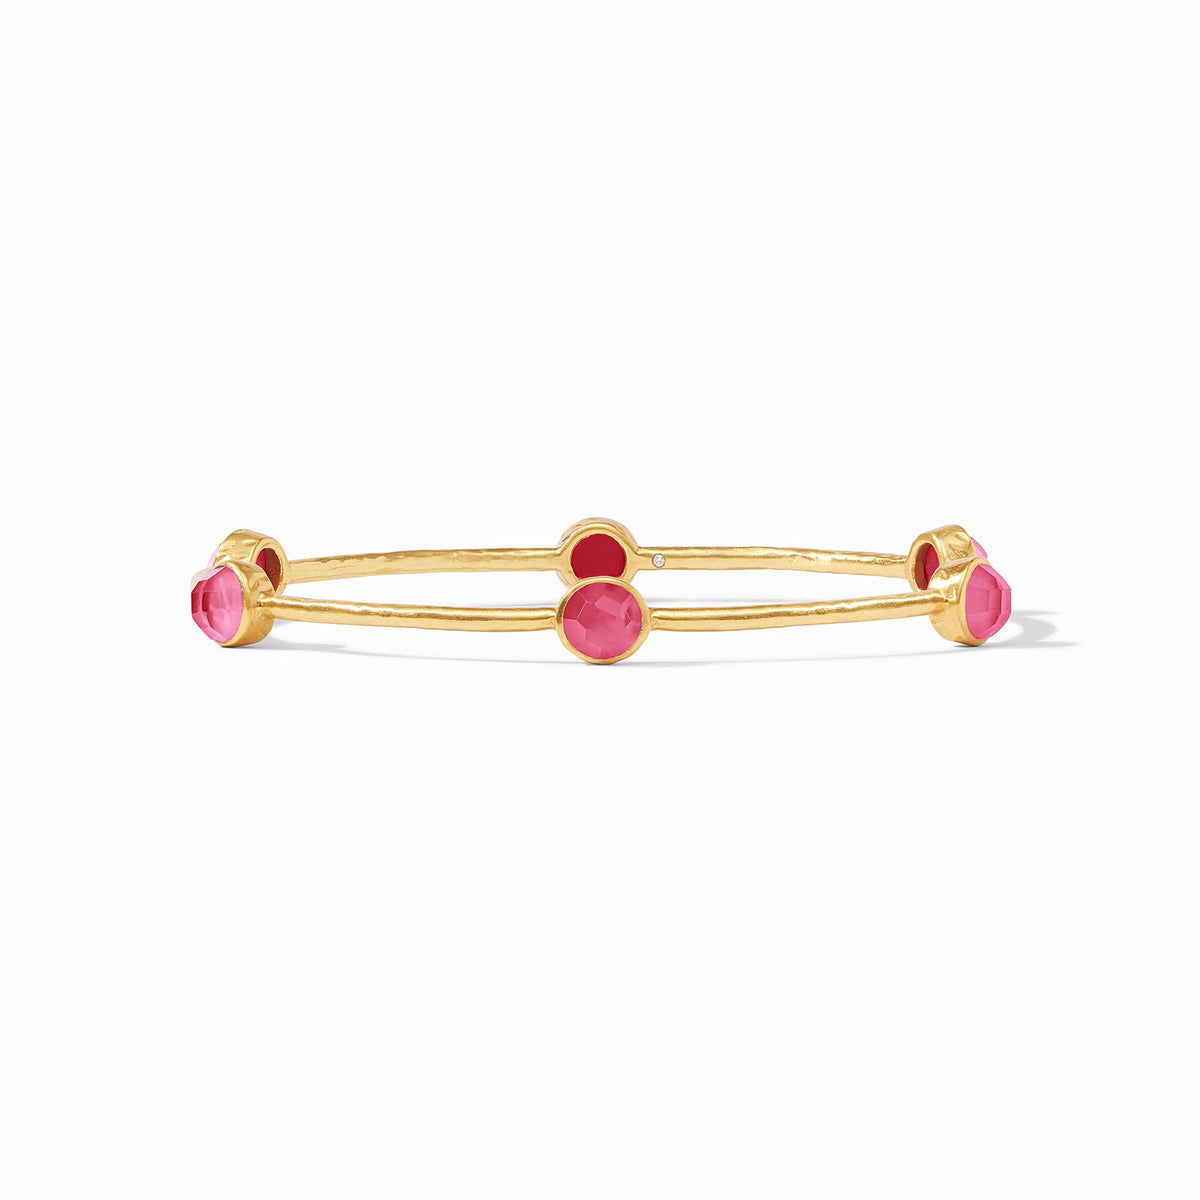 Julie Vos - Milano Luxe Bangle, Iridescent Raspberry / Large